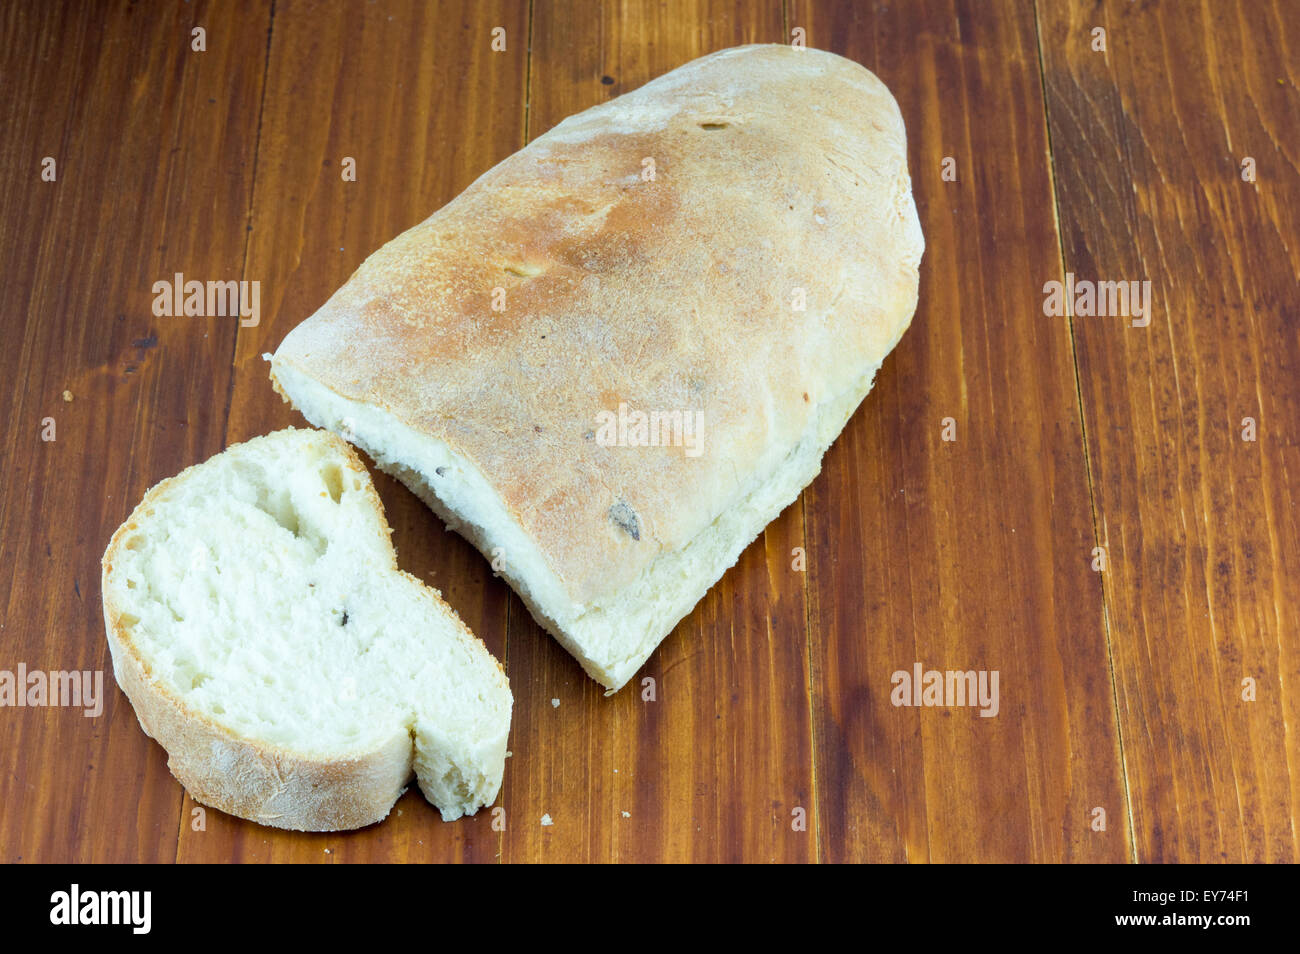 Cut homemade bread on a table Stock Photo